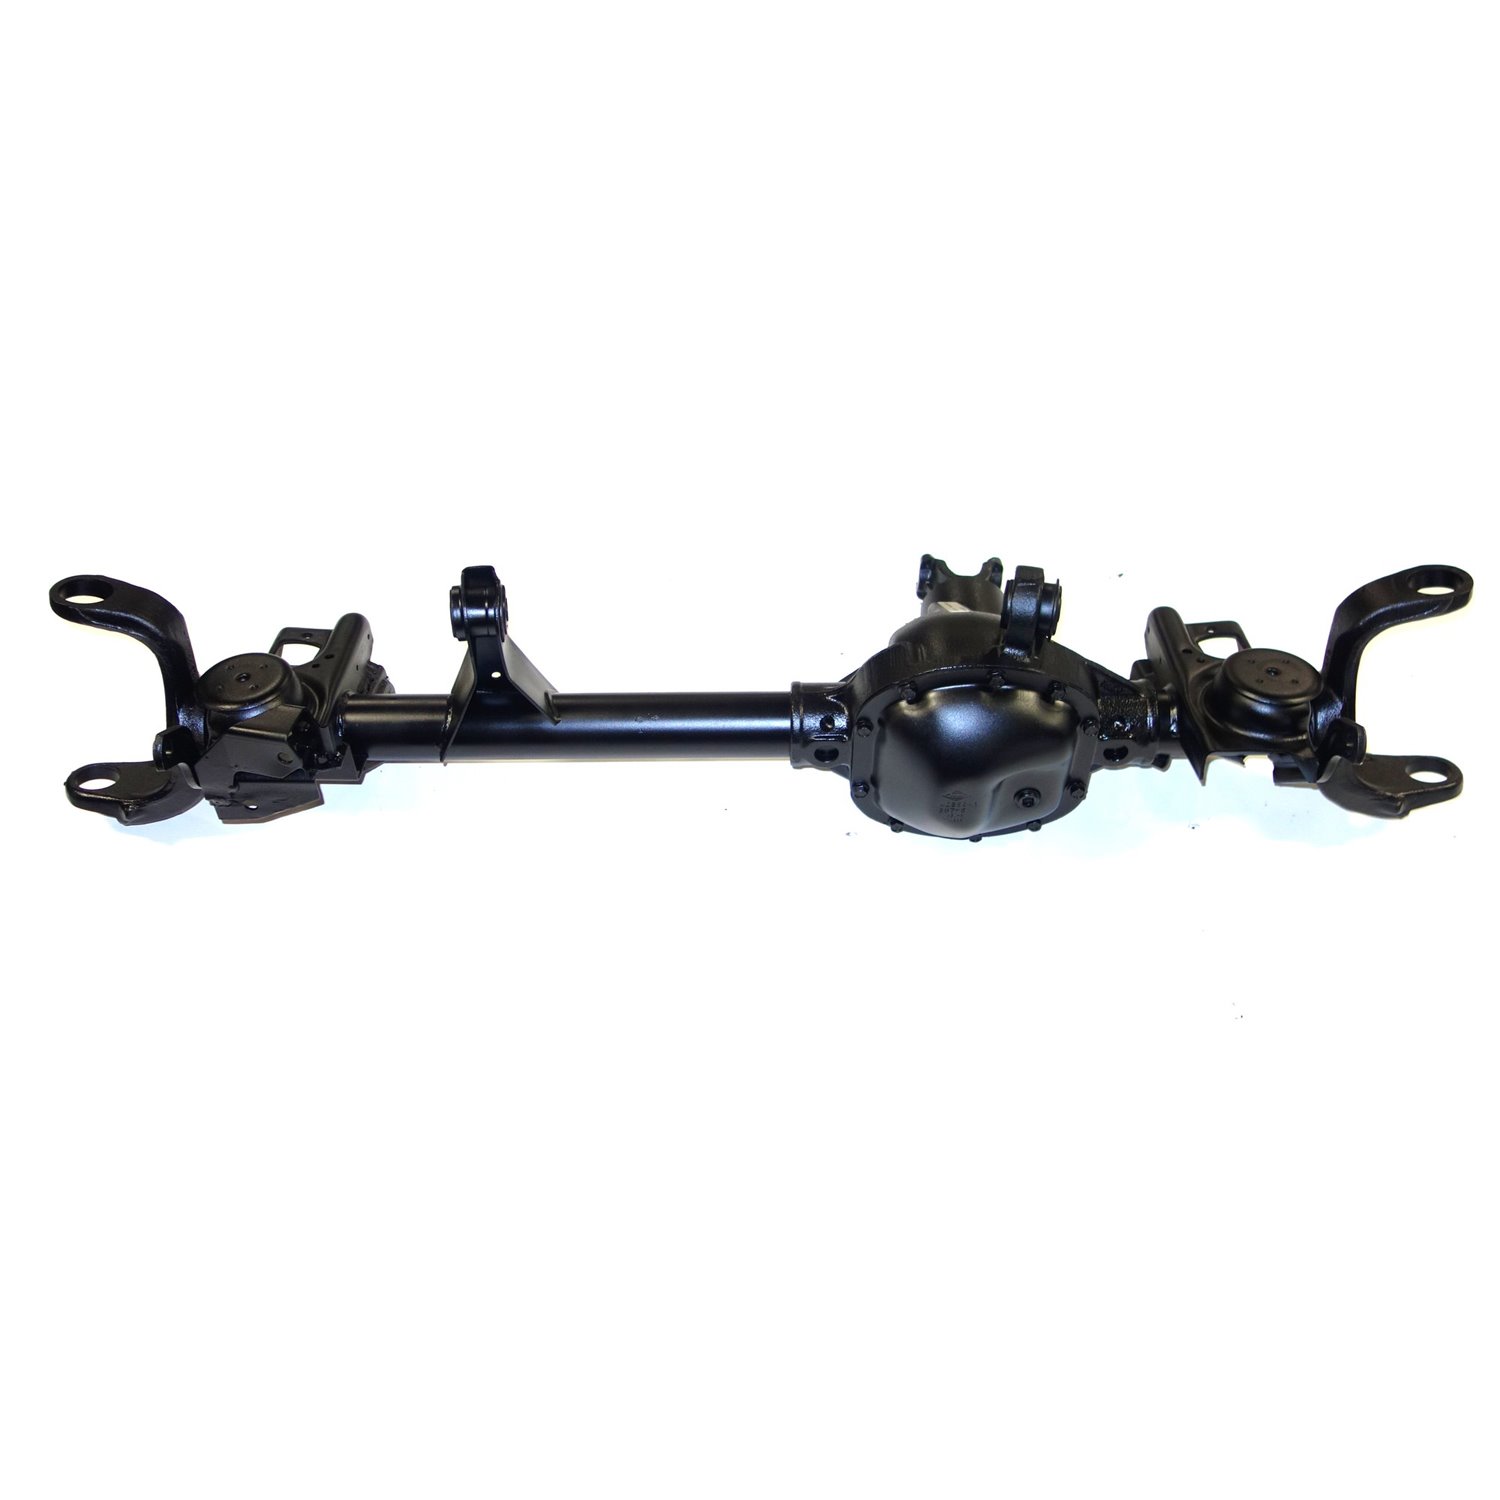 Remanufactured Complete Axle Assembly for Dana 30 97-05 Jeep Wrangler 3.73 Ratio with ABS